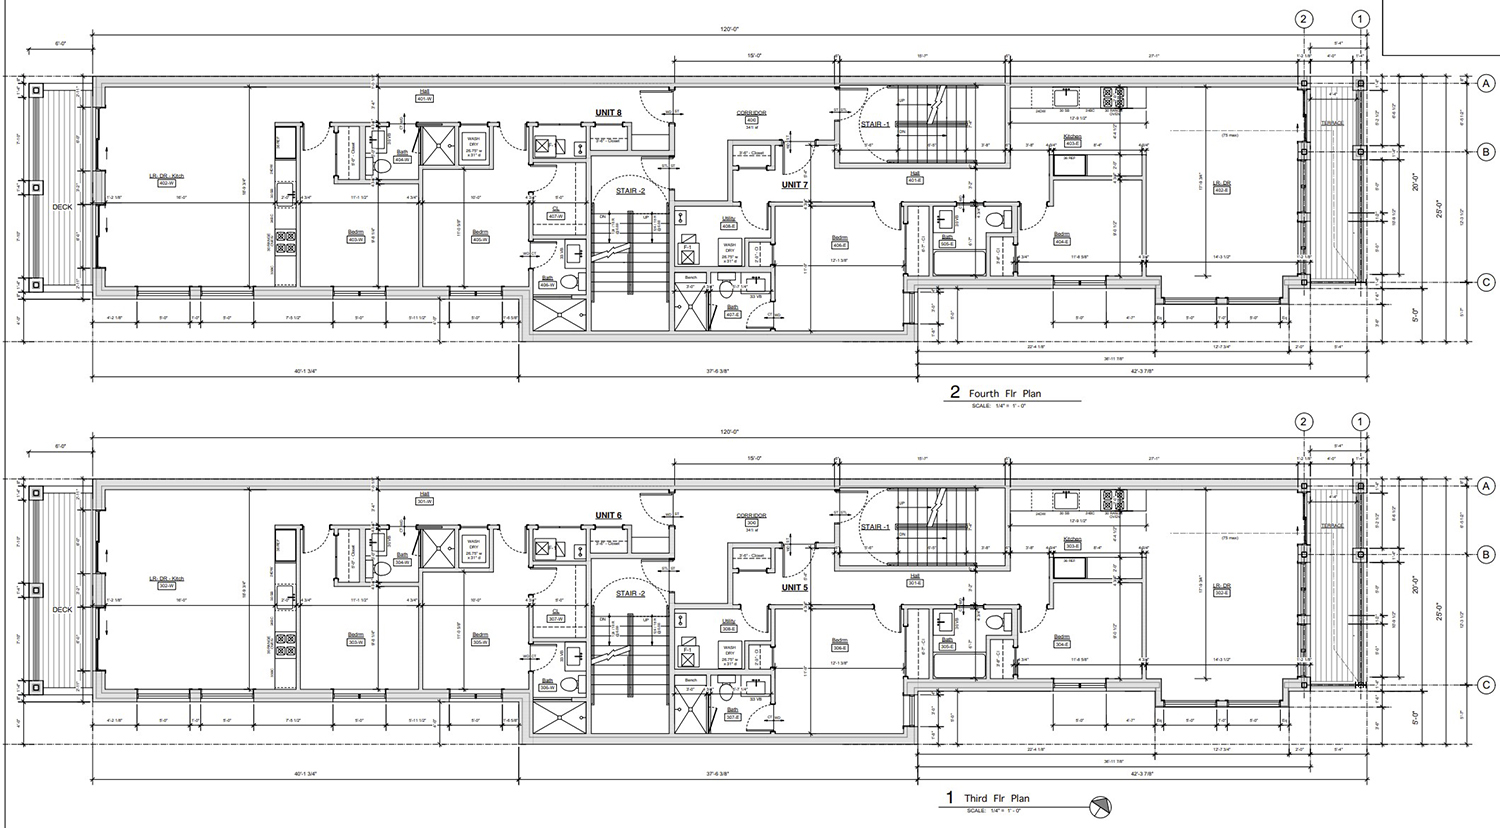 Third and Fourth Floor Plans for 3250 N Clark Street. Drawing by Stoneberg + Gross Architects